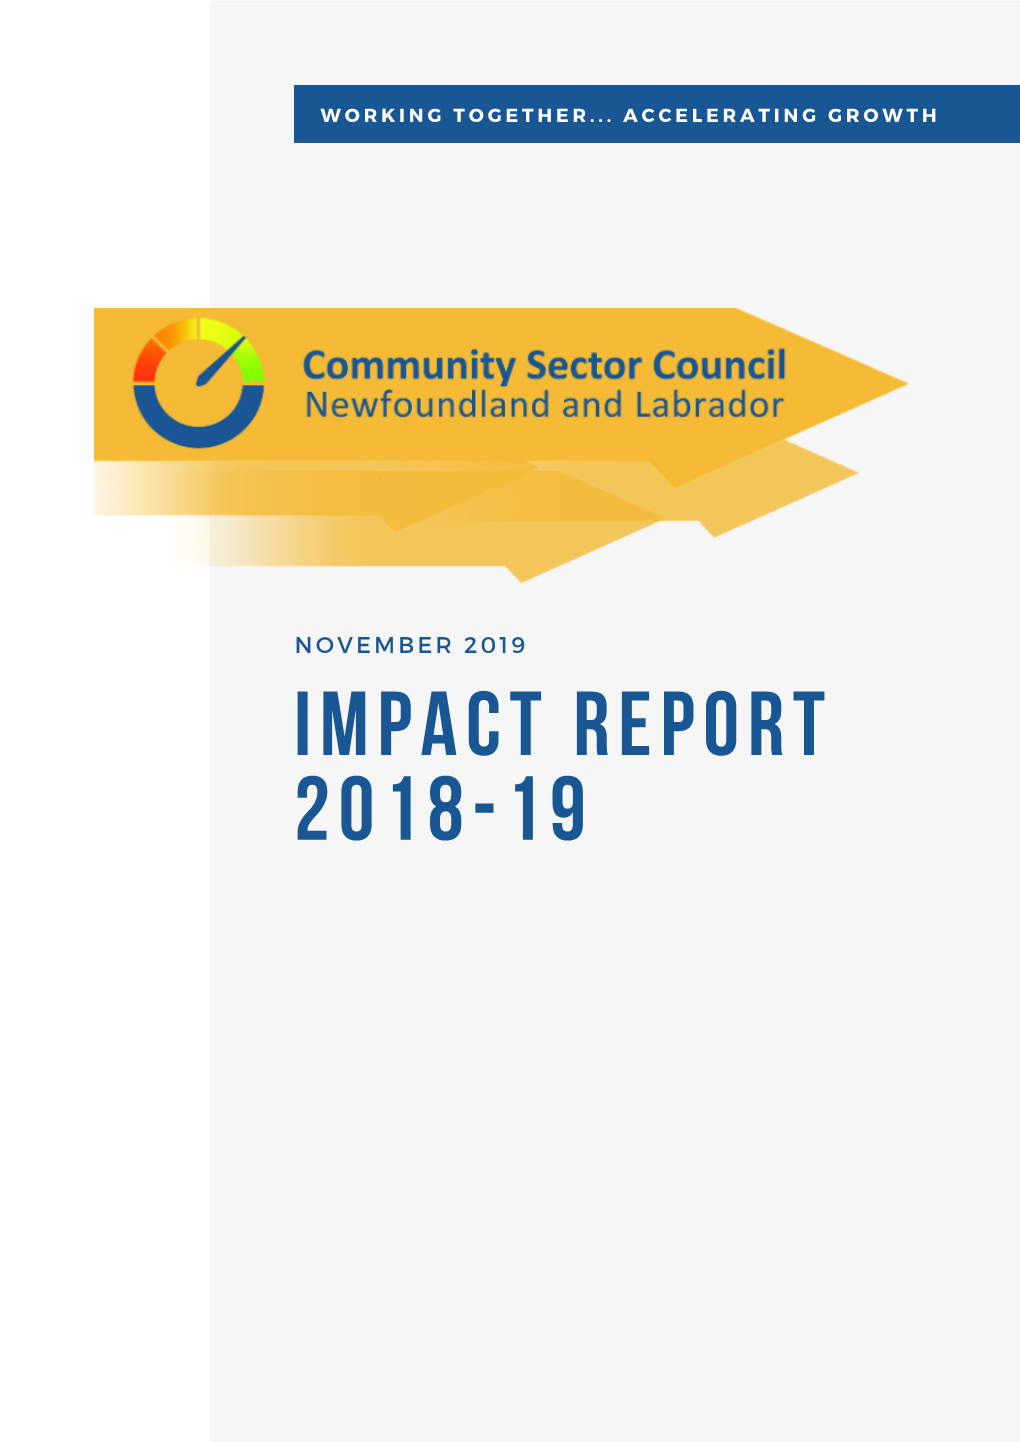 Impact Report 2018-19 Working Together